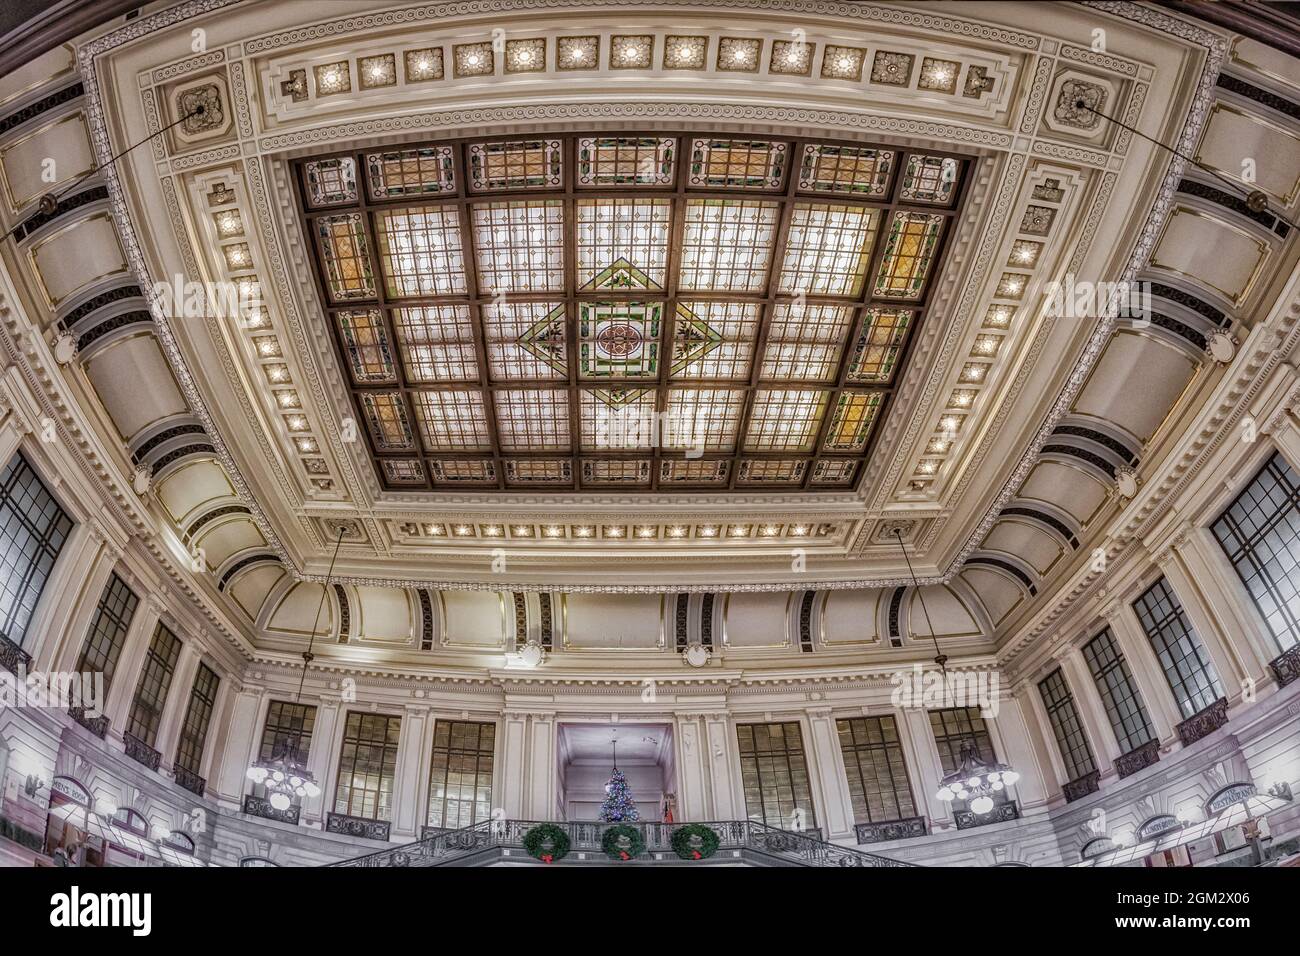 Lackawanna Waiting Room NJ - The American Industrial architectural style main waiting room at the Erie Lackawanna train terminal station in Hoboken, N Stock Photo